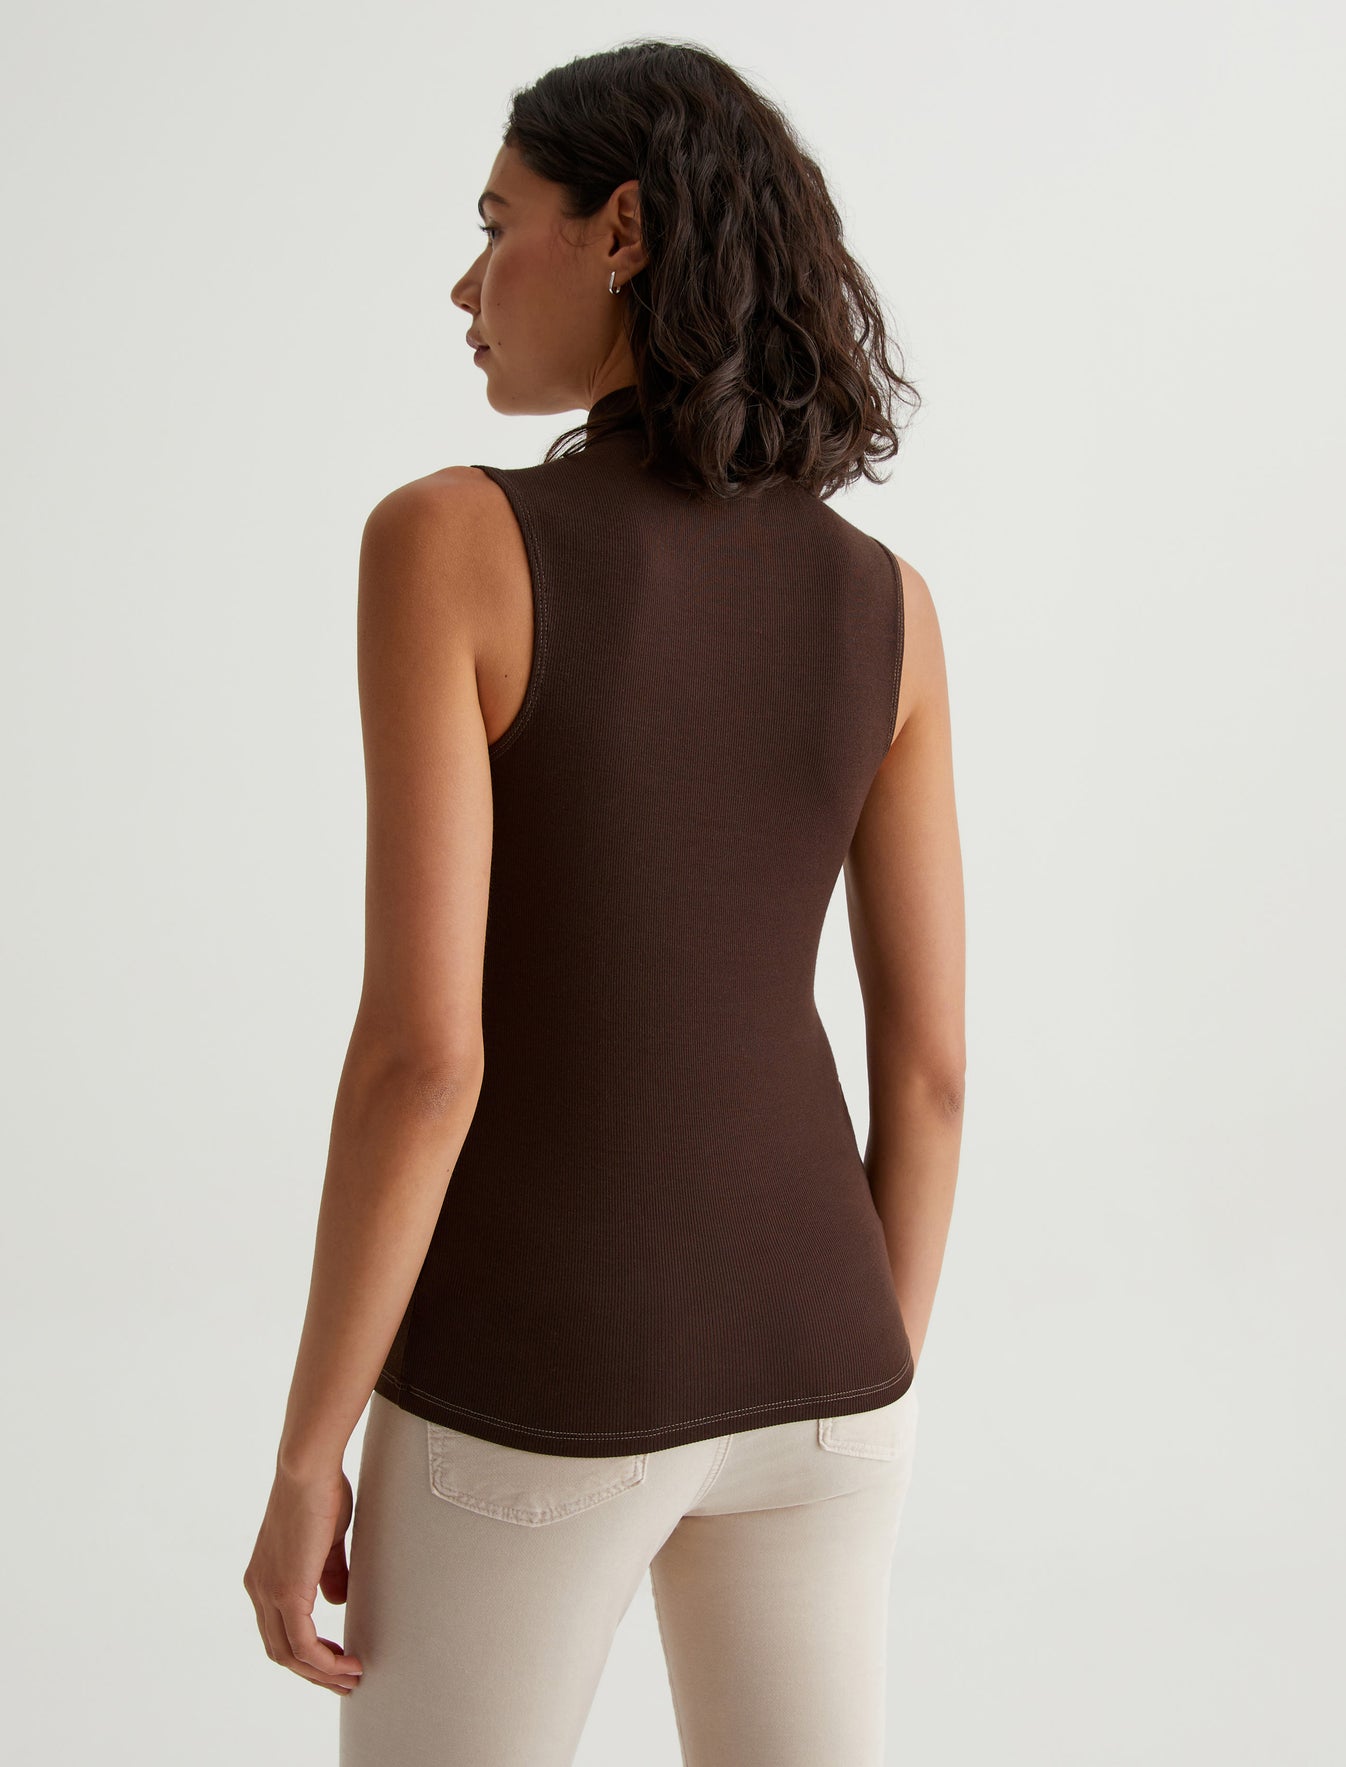 Womens Edie Sleeveless Turtleneck Store Chocolate Bitter Official Jeans at AG